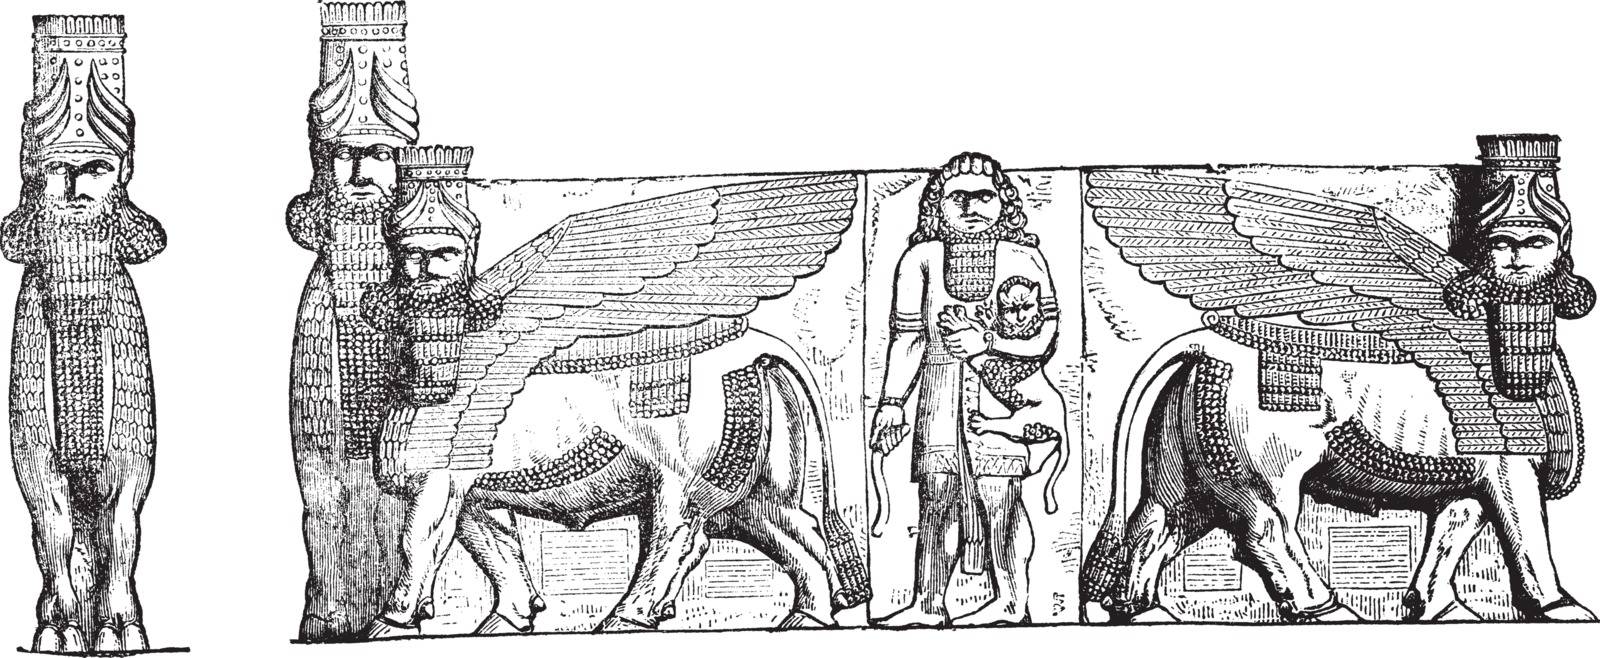 Relief Sculptures at the Entrance of Kuyunjik Palace Ruins, in Mosul, Iraq, vintage engraved illustration. Trousset encyclopedia (1886 - 1891).